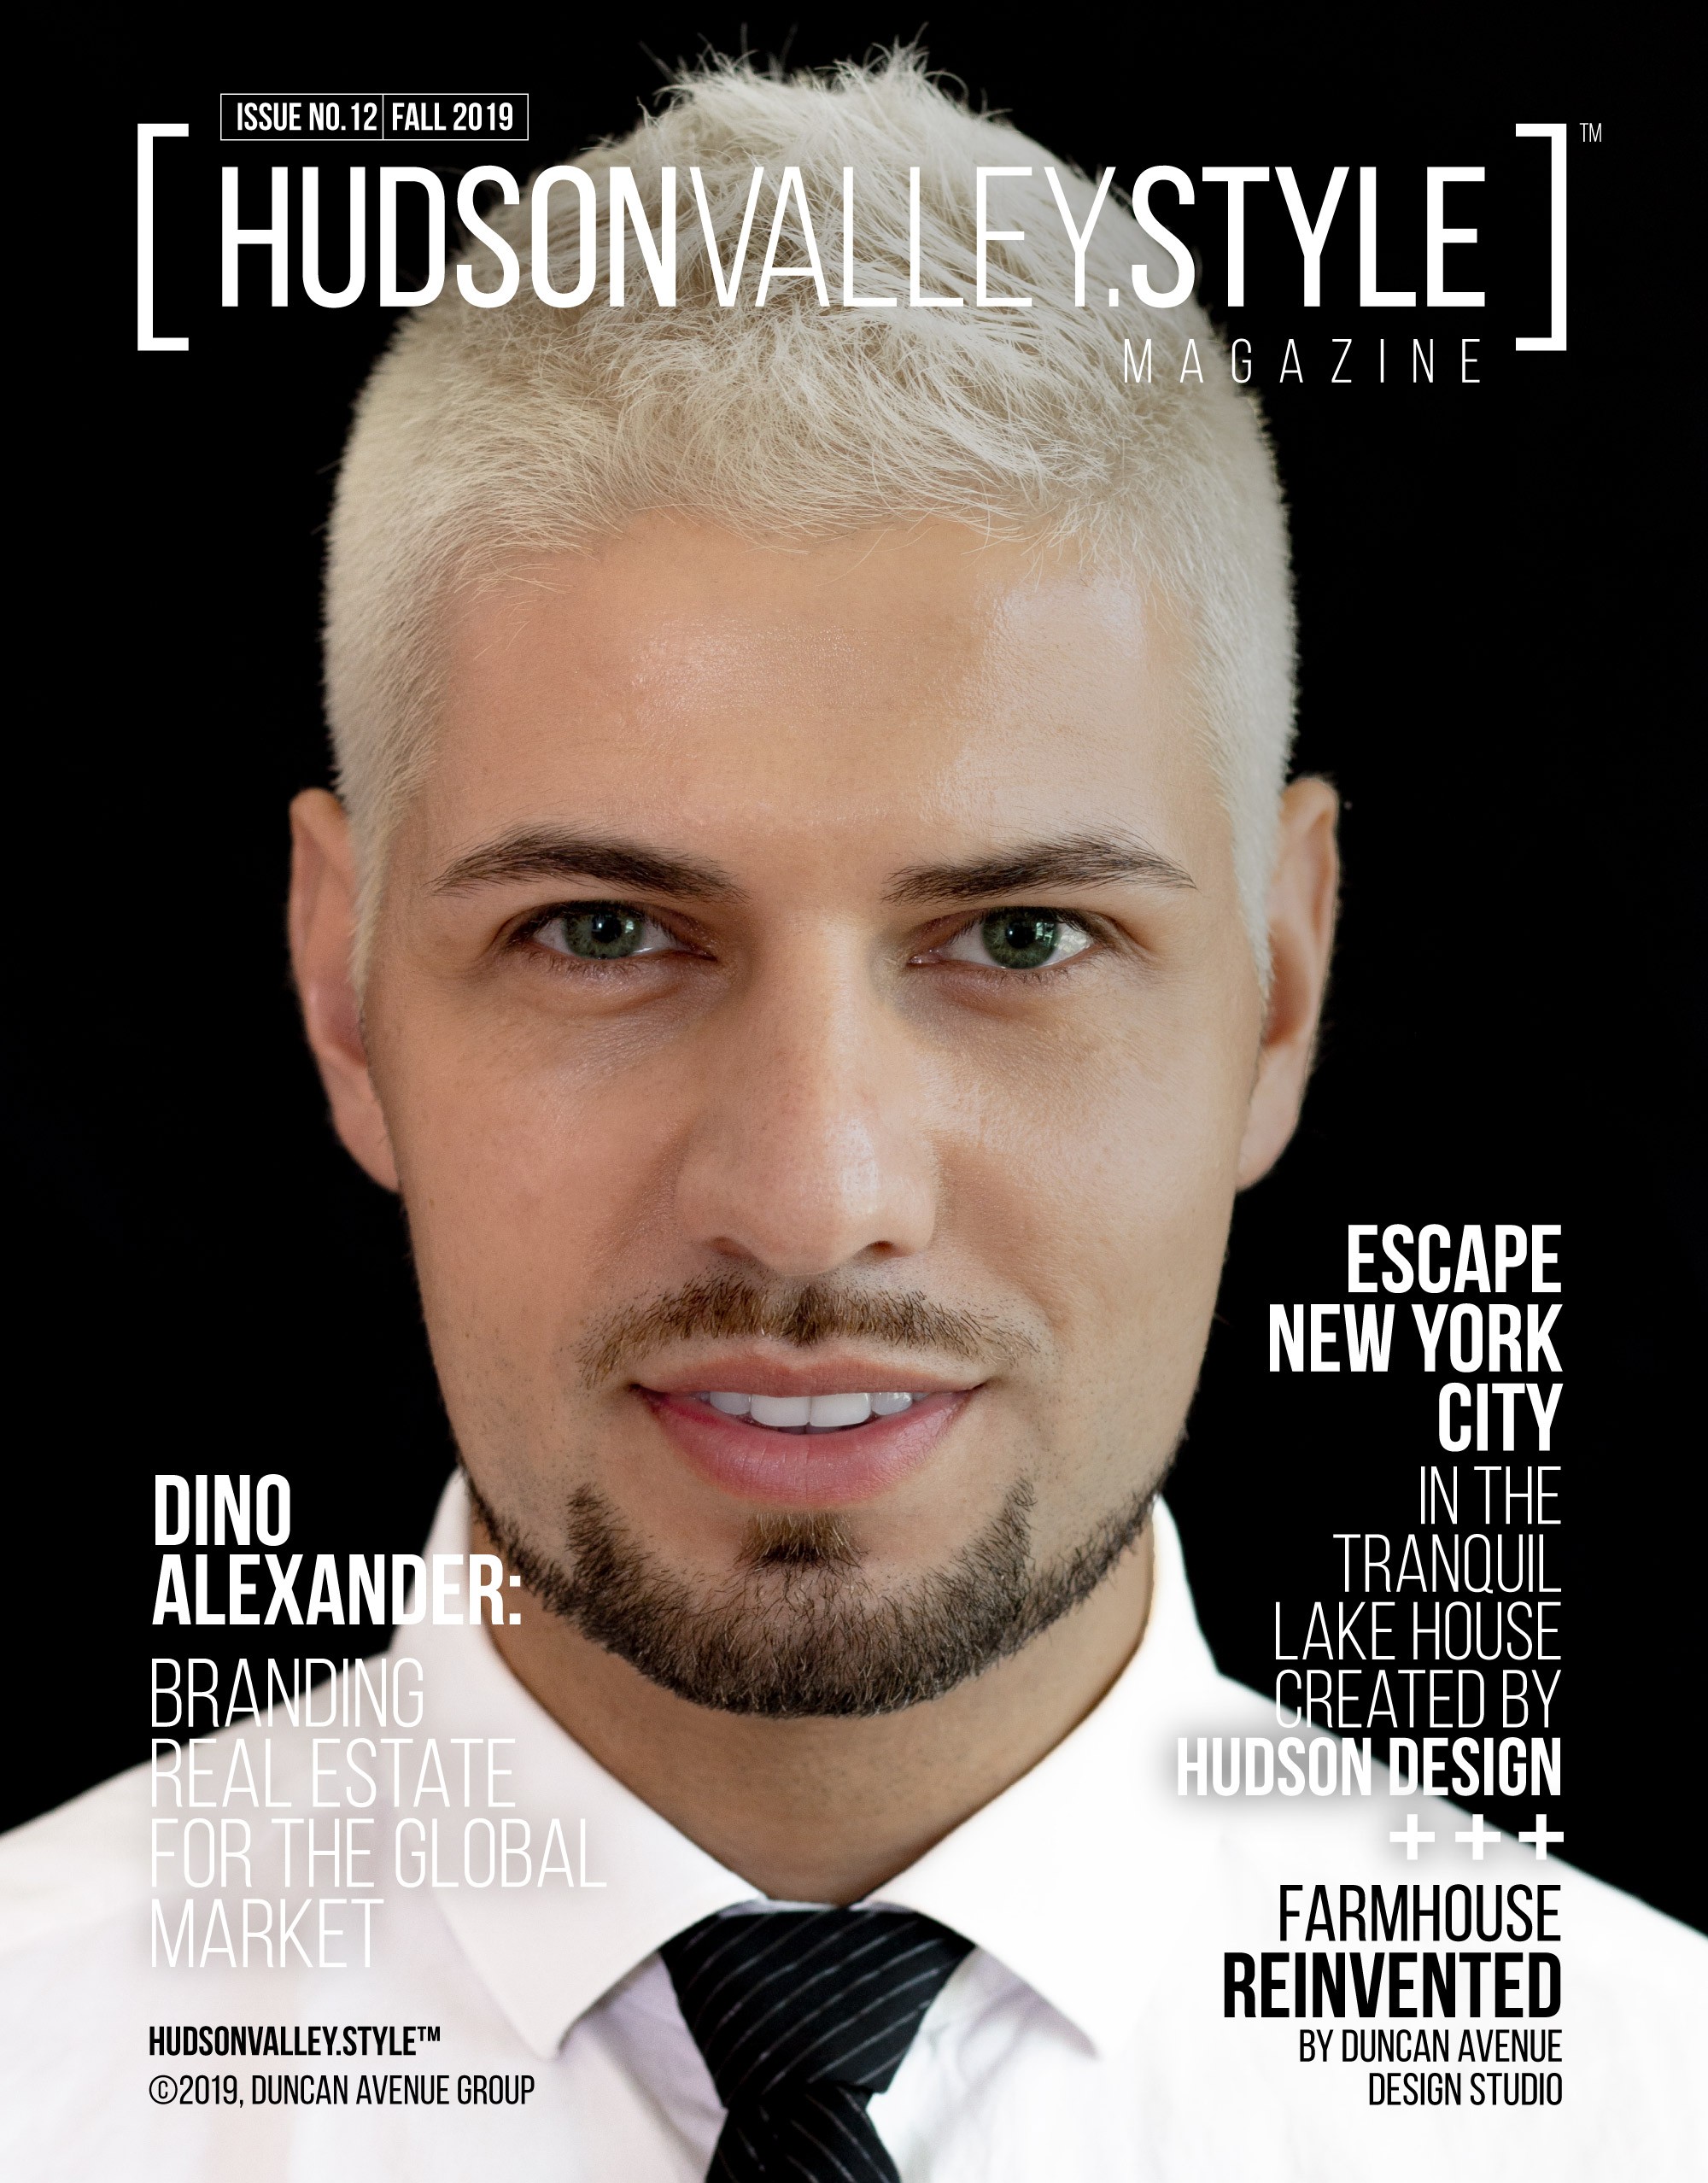 Hudson Valley Style Magazine - Fall 2019 Cover - Dino Alexander